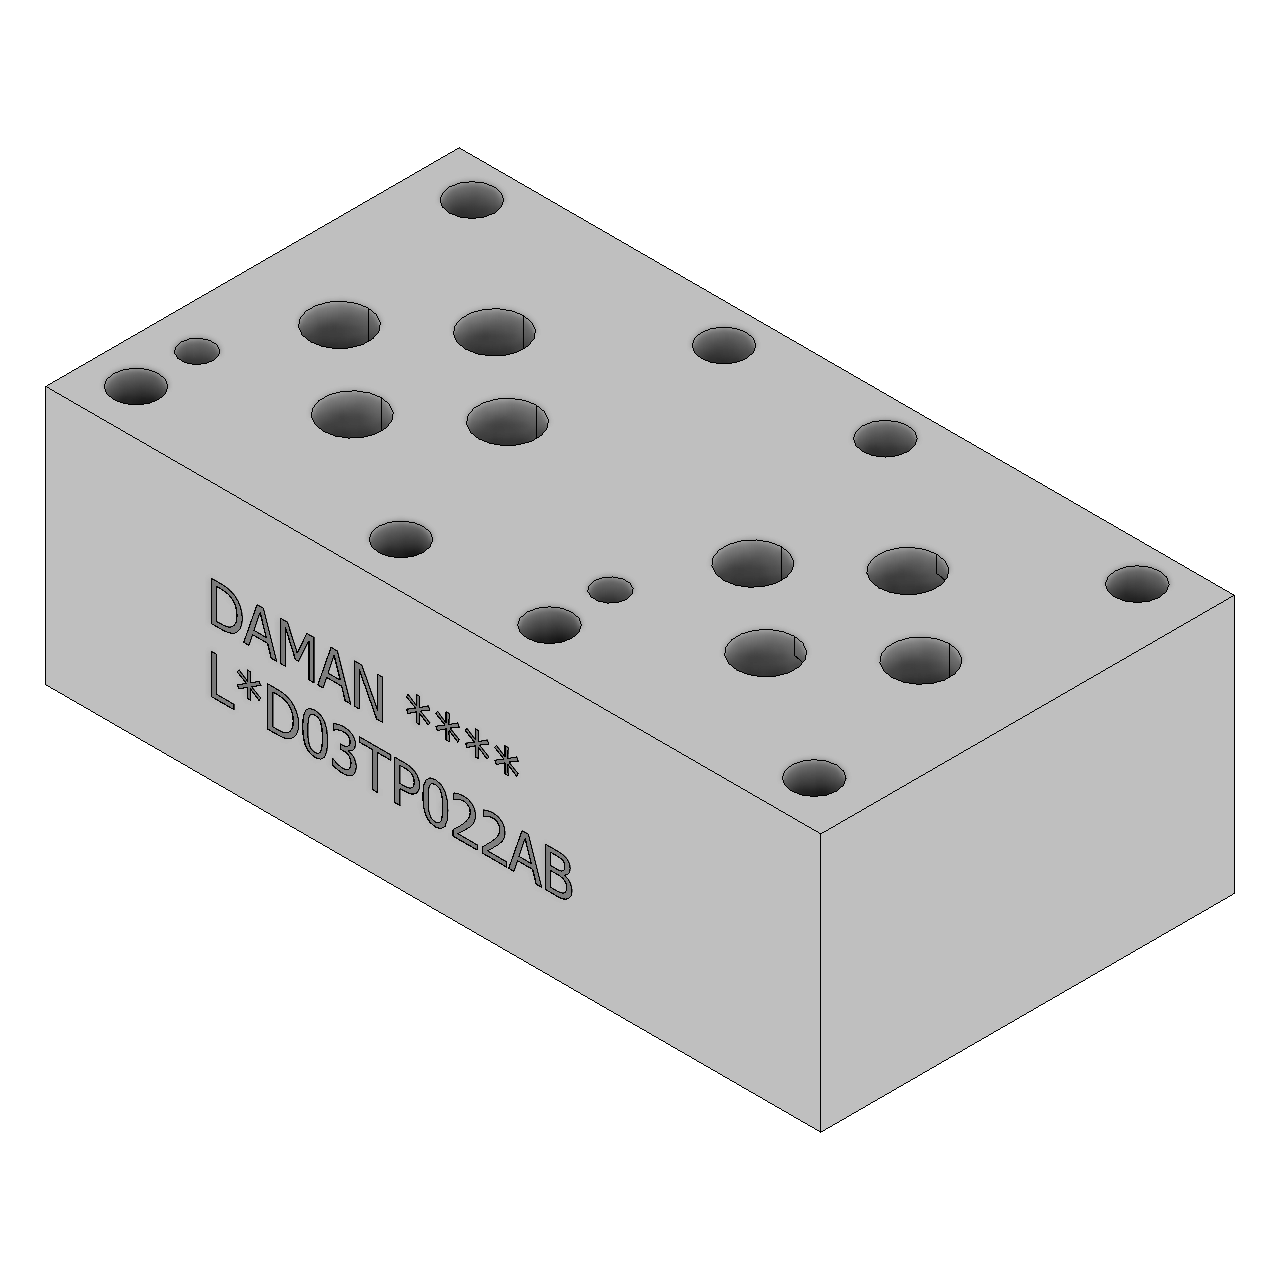 LDD03TP022AB - Tapping Plates